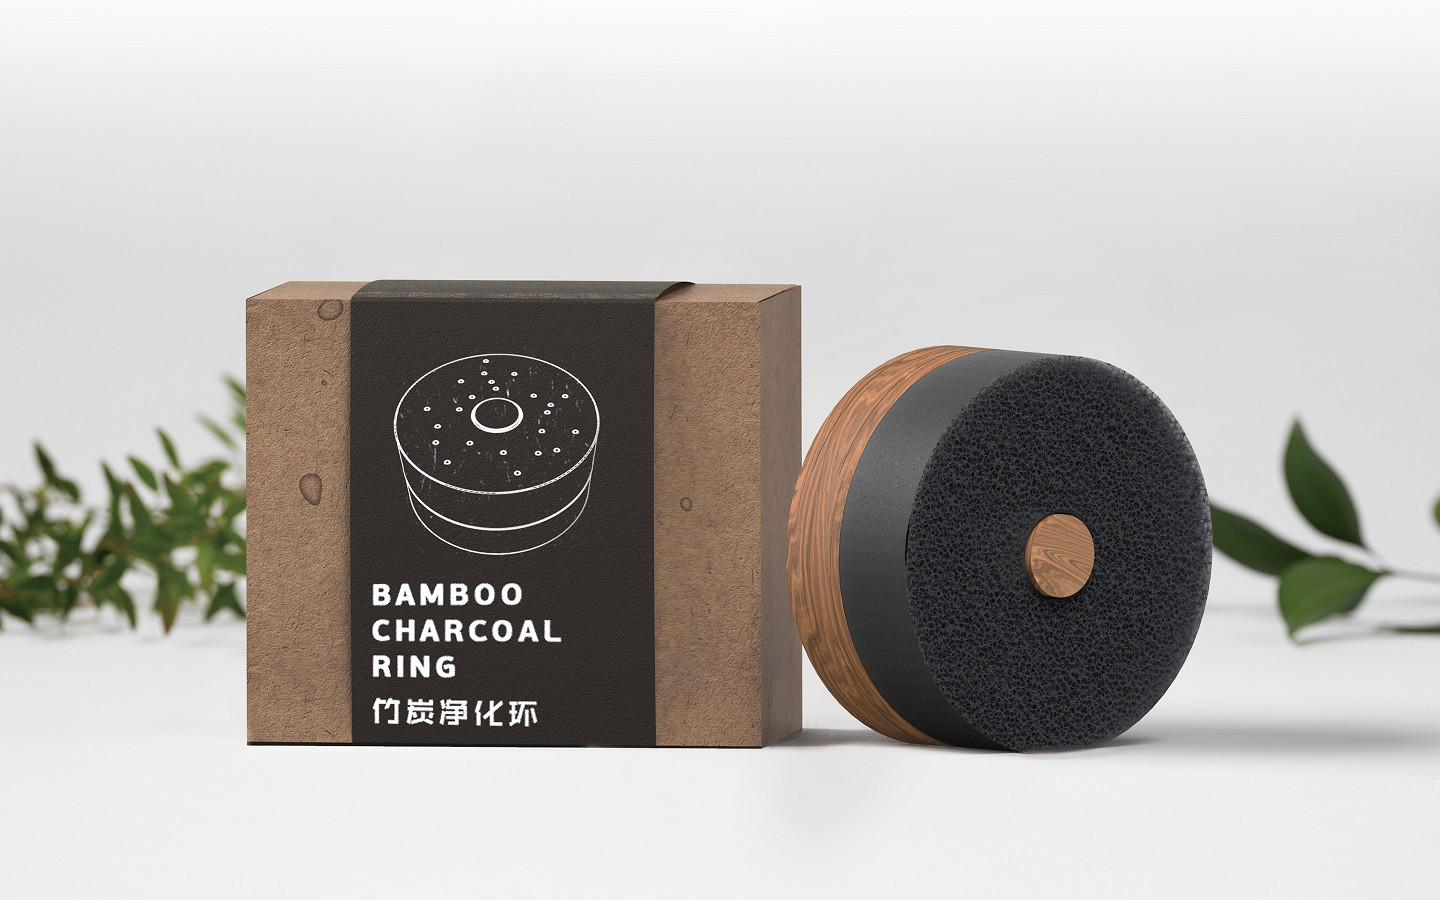 Bamboo Charcoal Ring